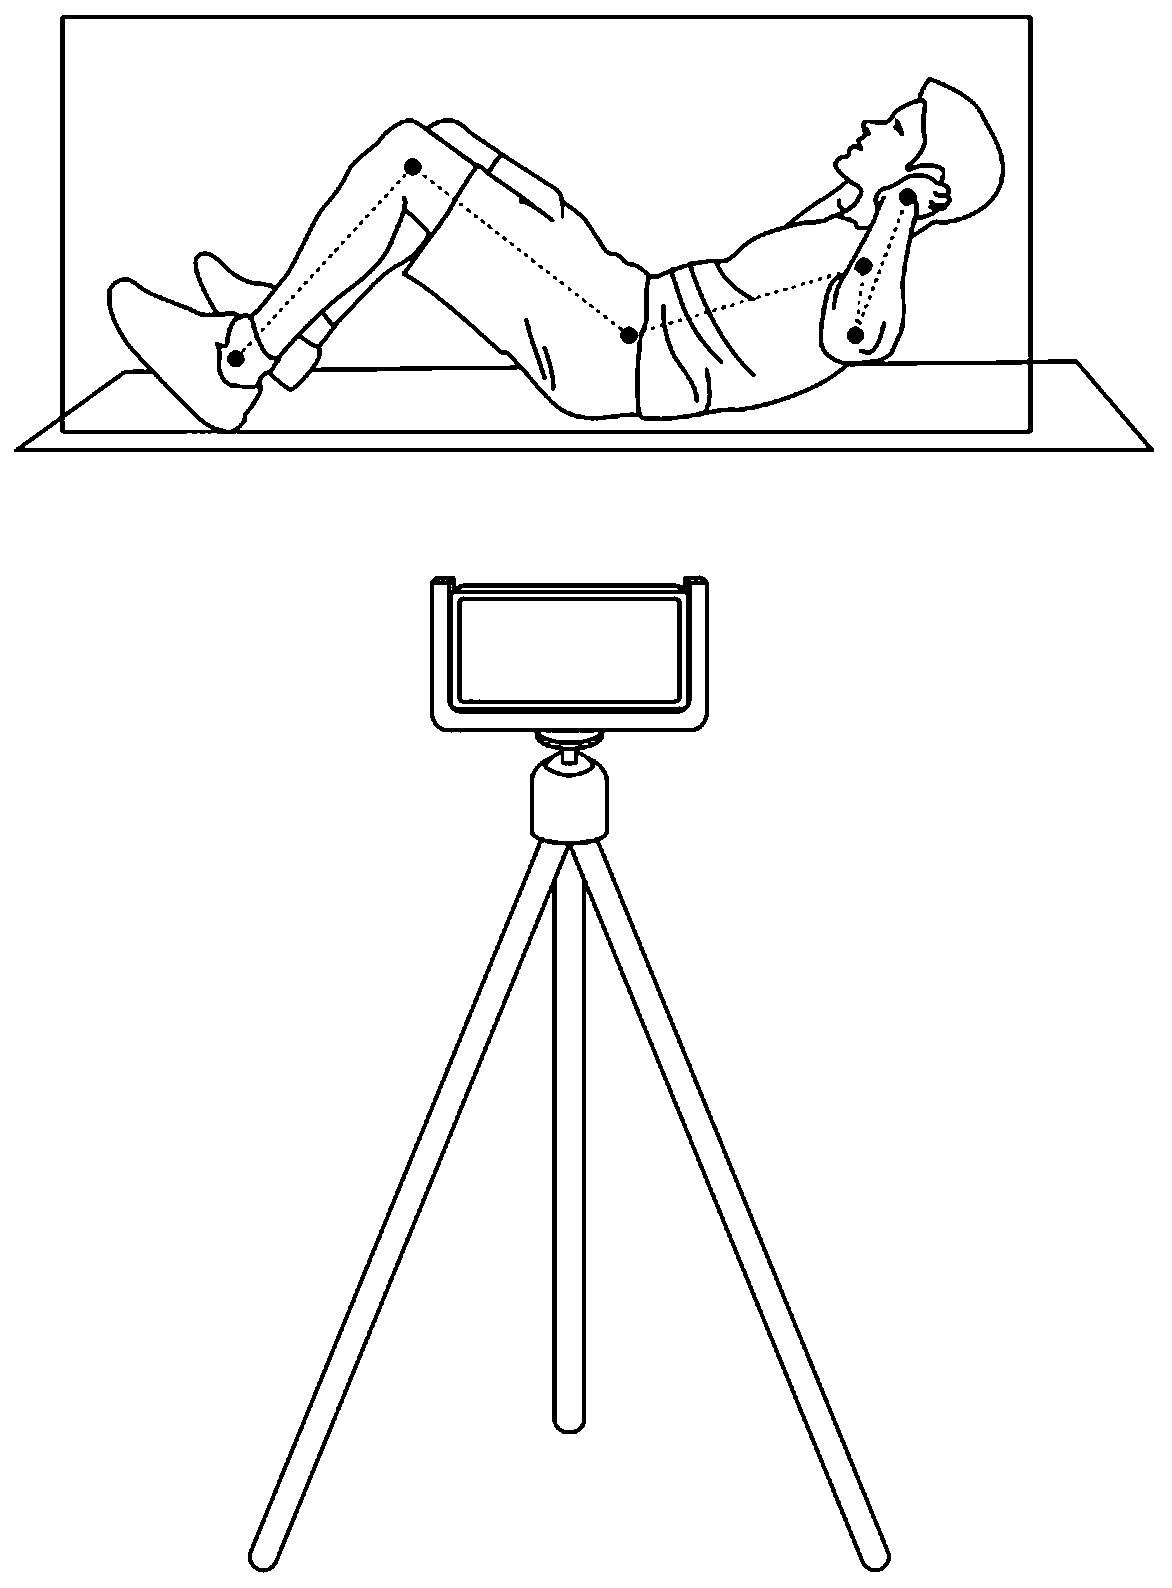 Sit-up detection system and method based on human body and skeleton key point recognition